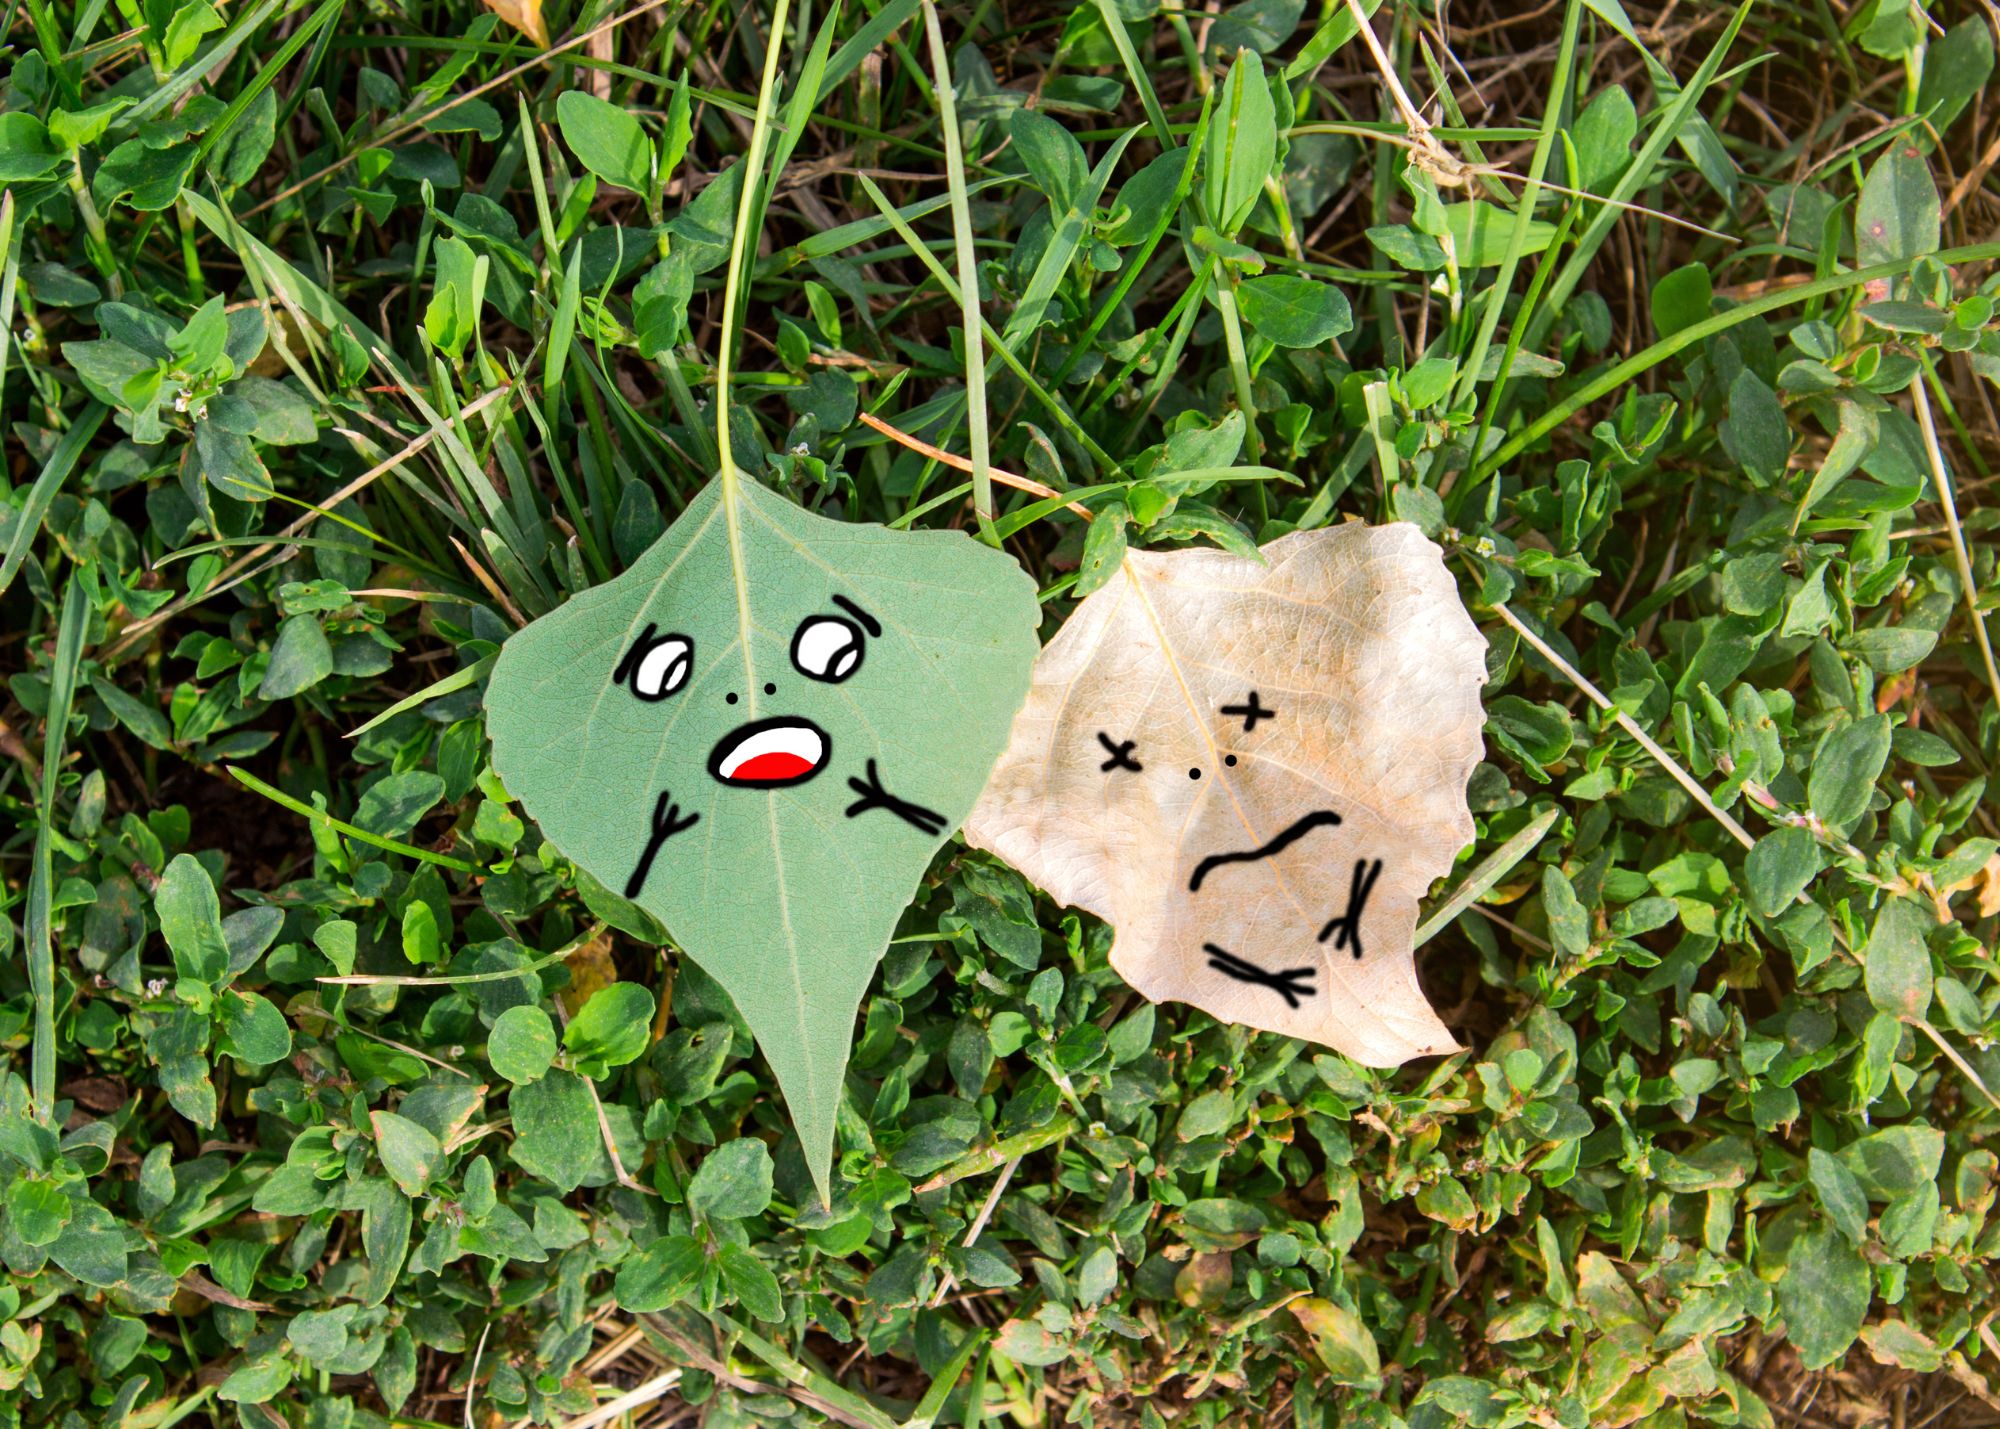 A visual meme showing a green leaf with a shocked look lying next to a "dead" leaf.